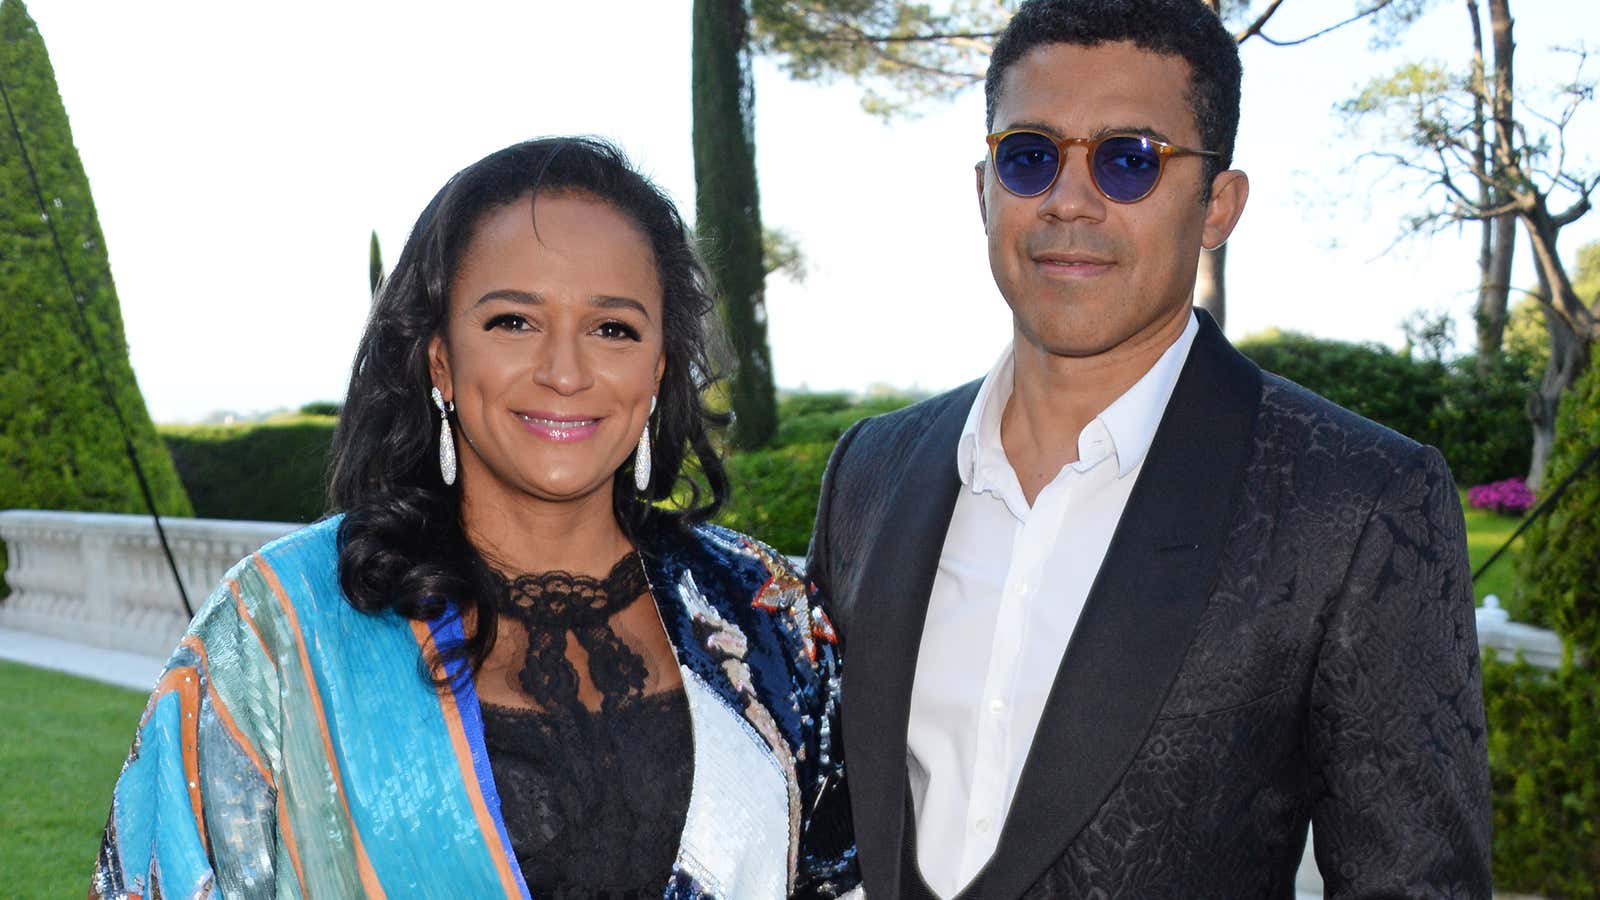 Isabel dos Santos and her husband Sindika Dokolo wear Dolce &amp; Gabbana at a gala in Cannes, 2018.